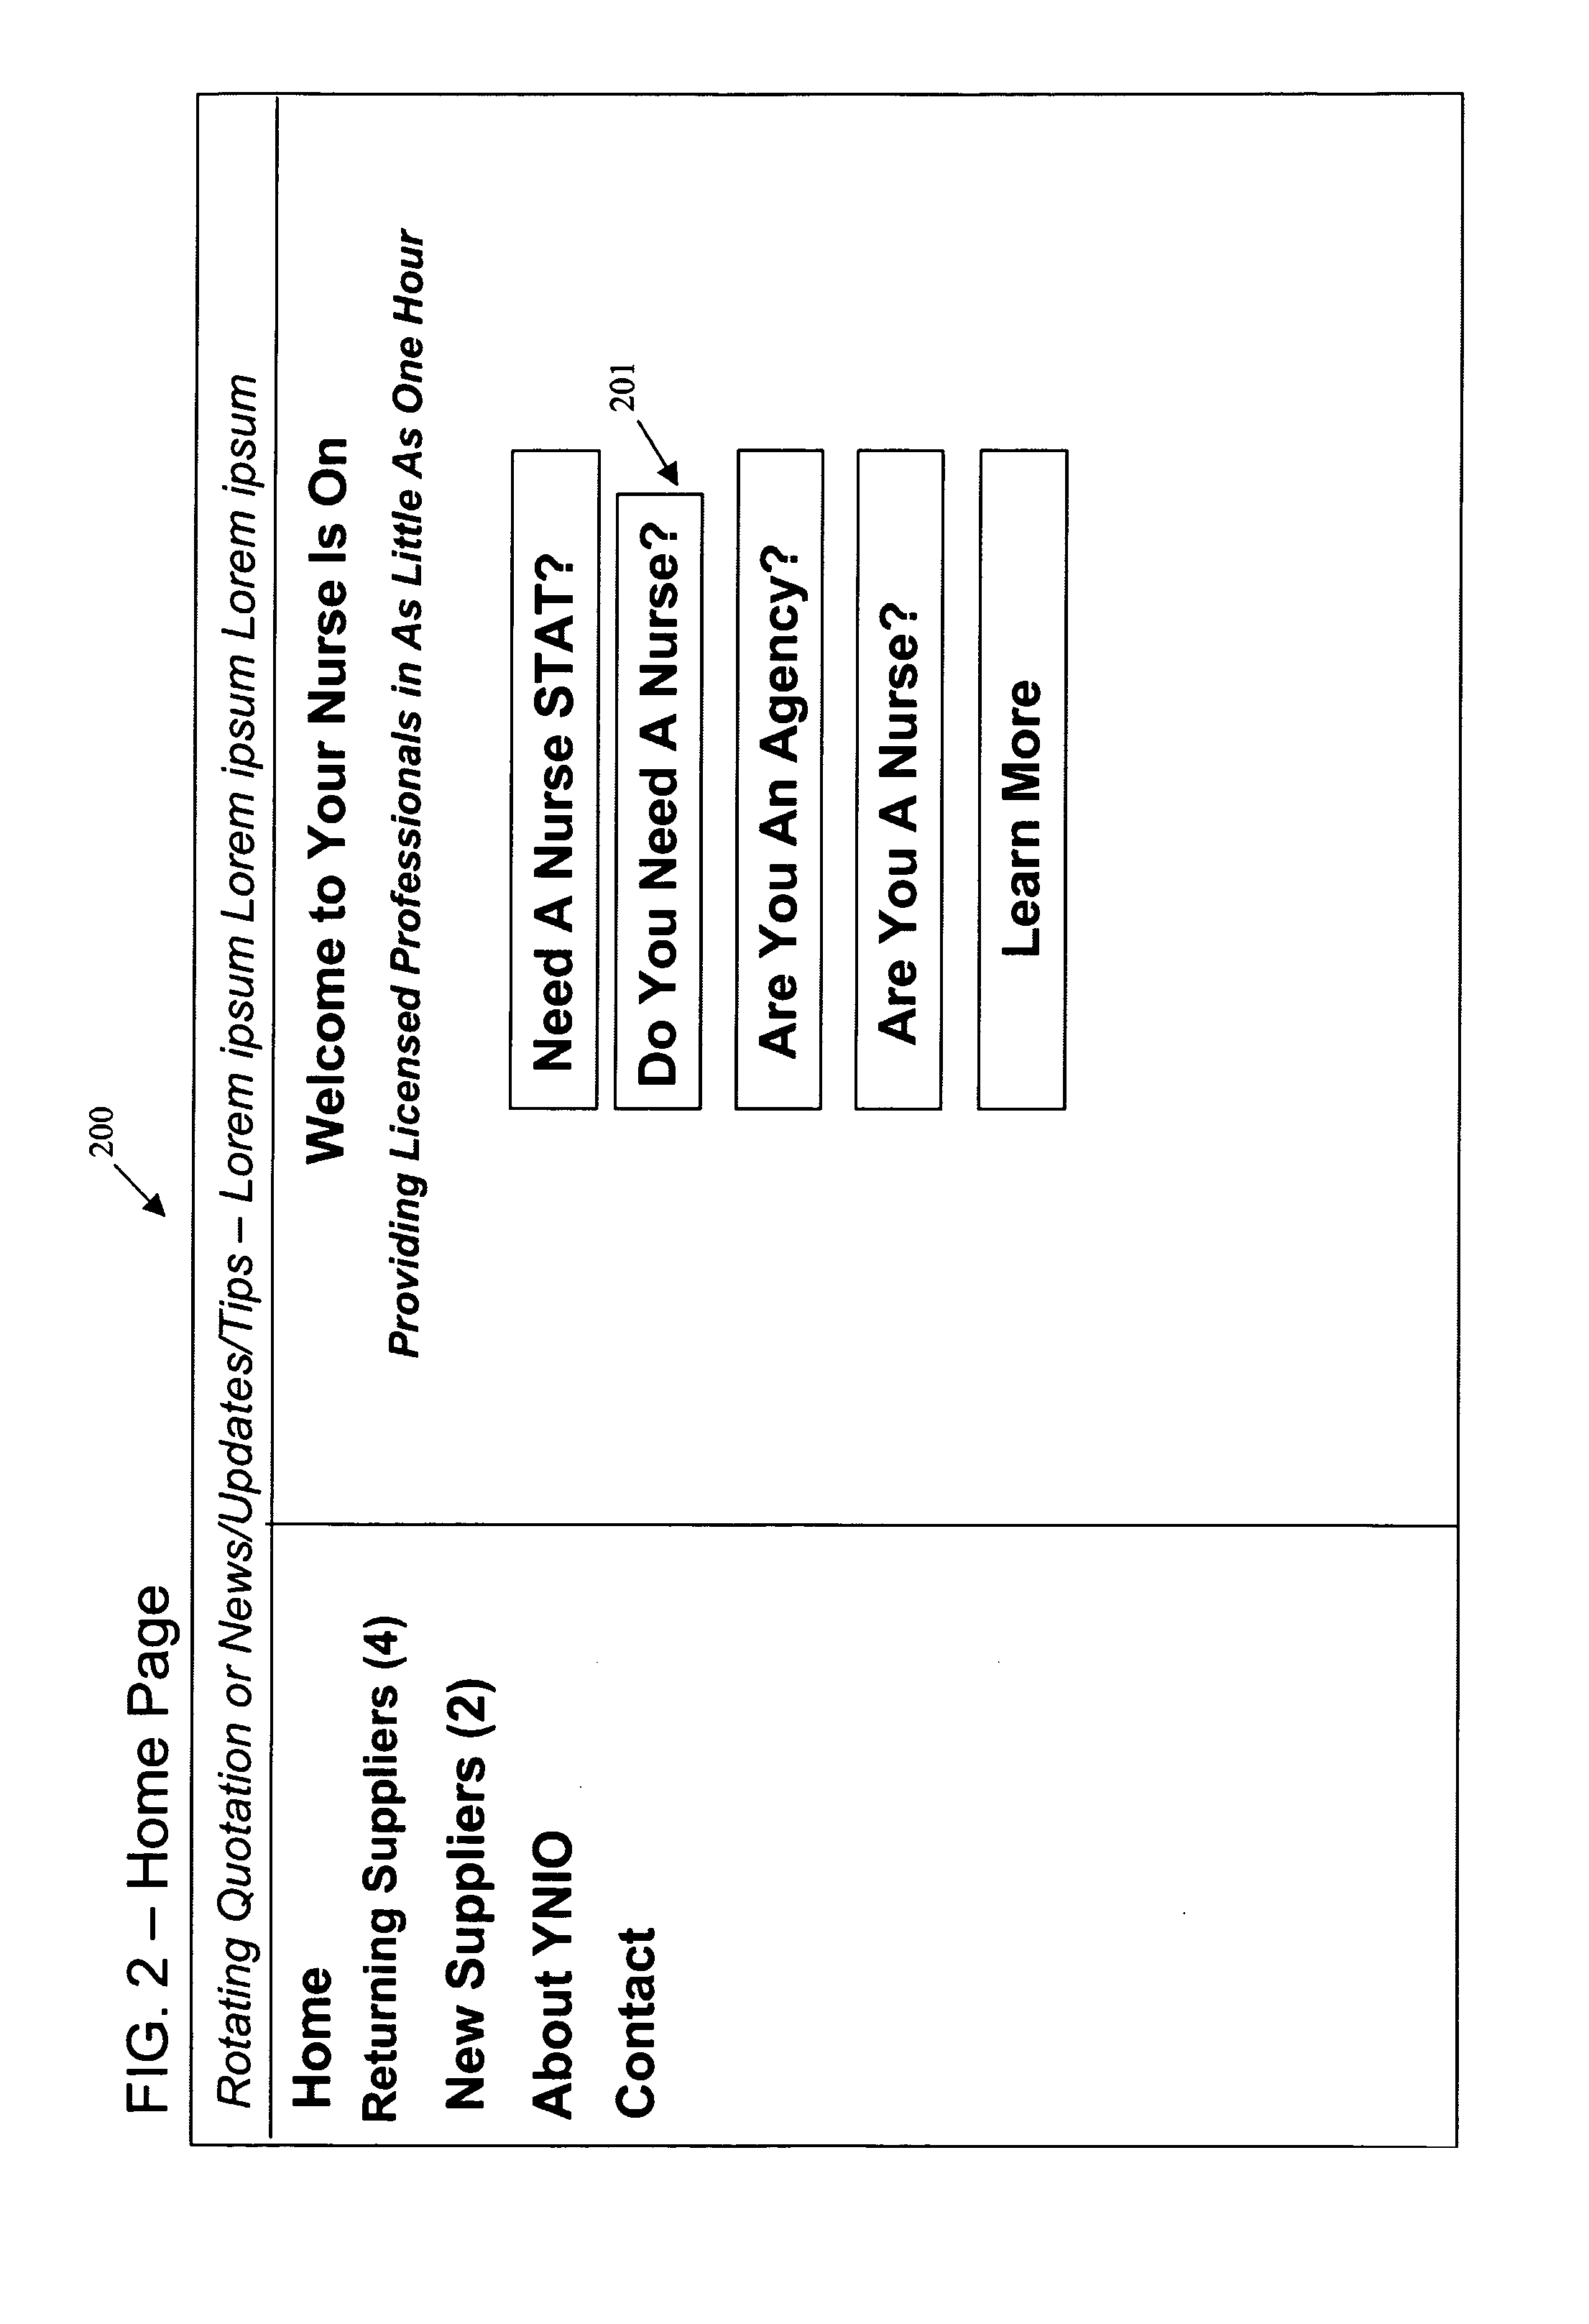 Method and apparatus to accelerate and improve efficiency of business processes through resource allocation